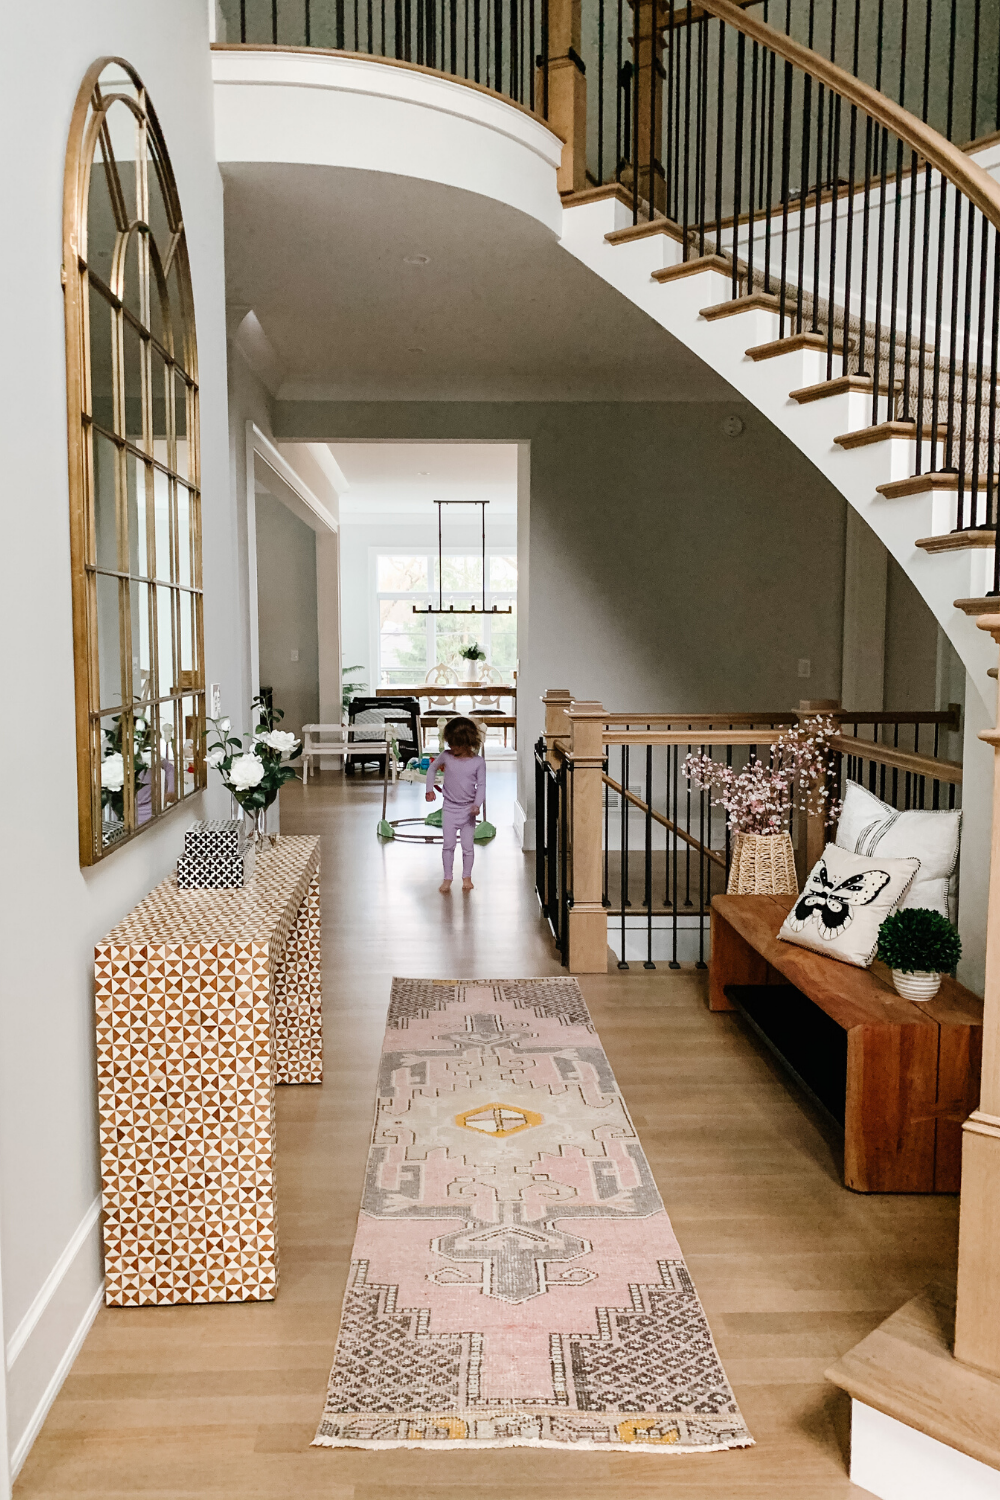 Our Entryway + A Vintage Rug Find - My Kind of Sweet